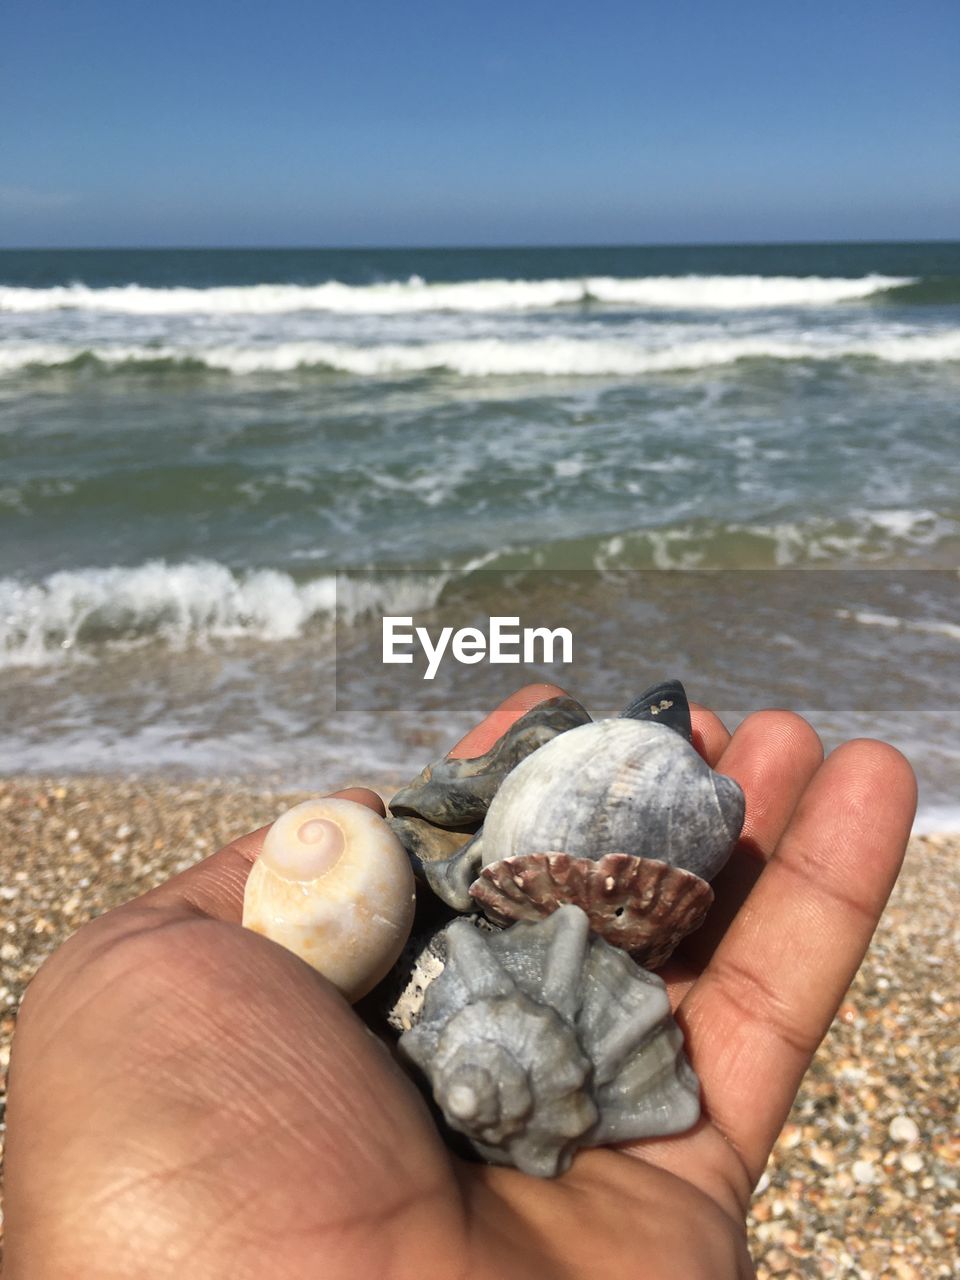 Cropped image of hand holding shells on beach